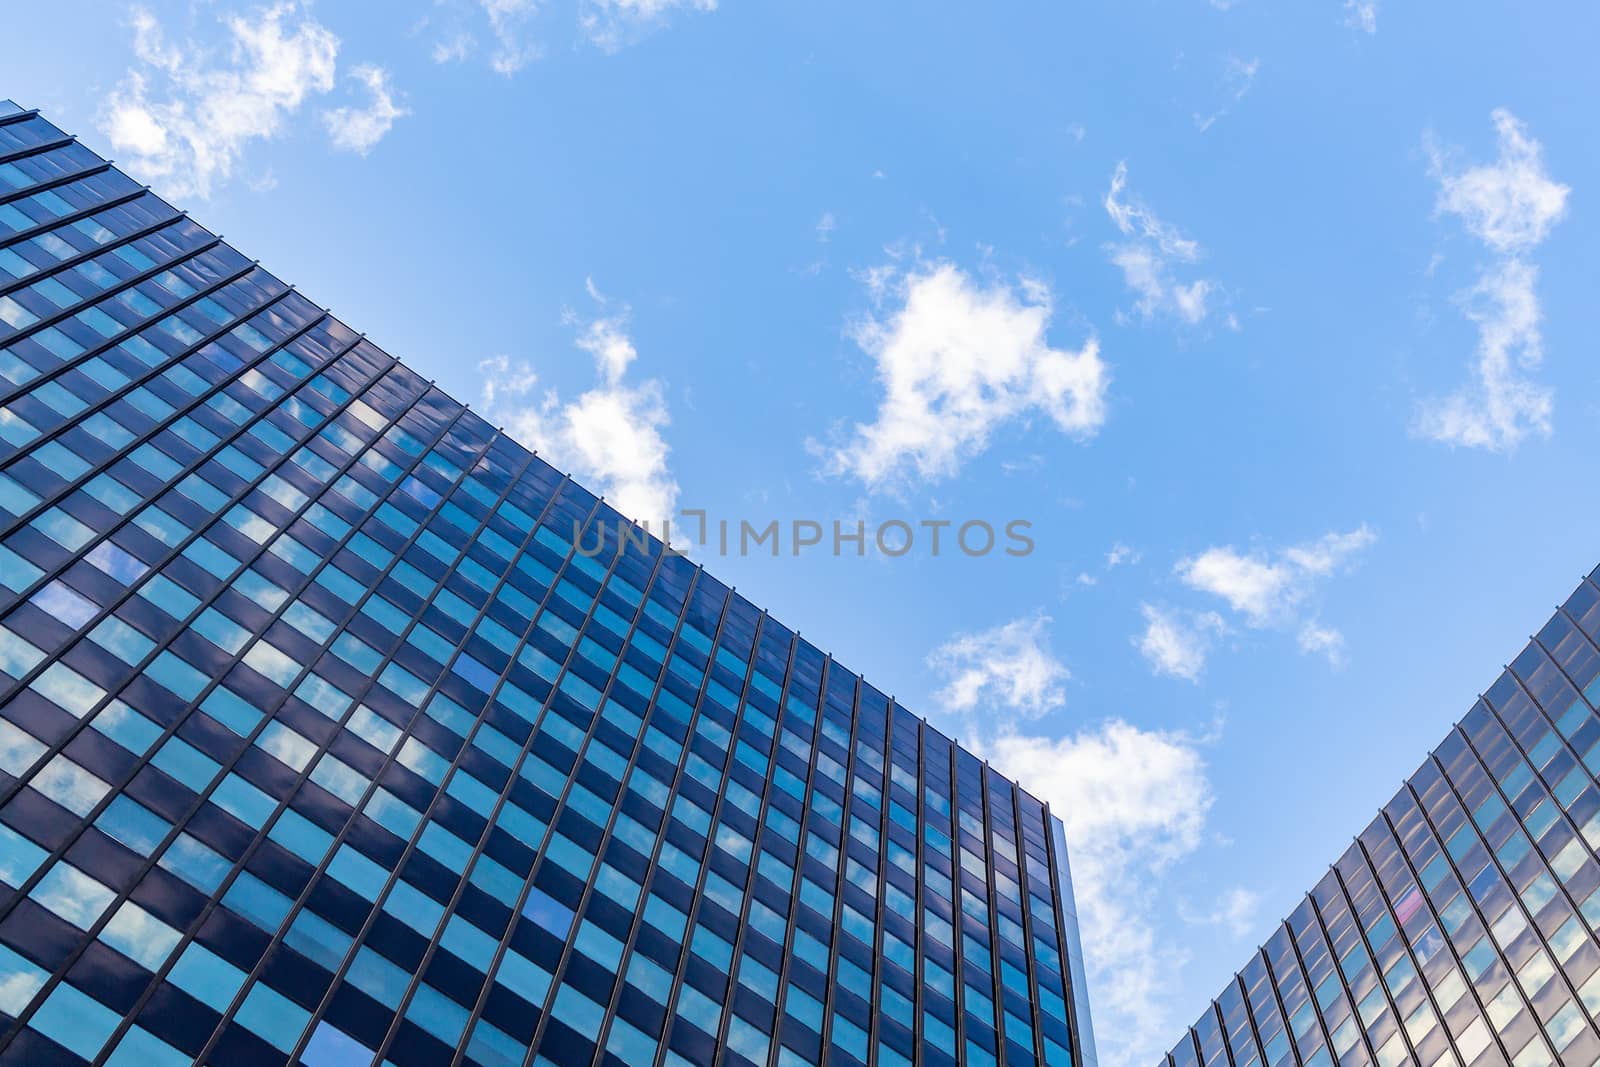 Commercial office buildings are viewed from the ground, looking up. A blue sky with a scattering of white clouds can be seen above, and in the reflecting windows. Their roofs of angle in and down.